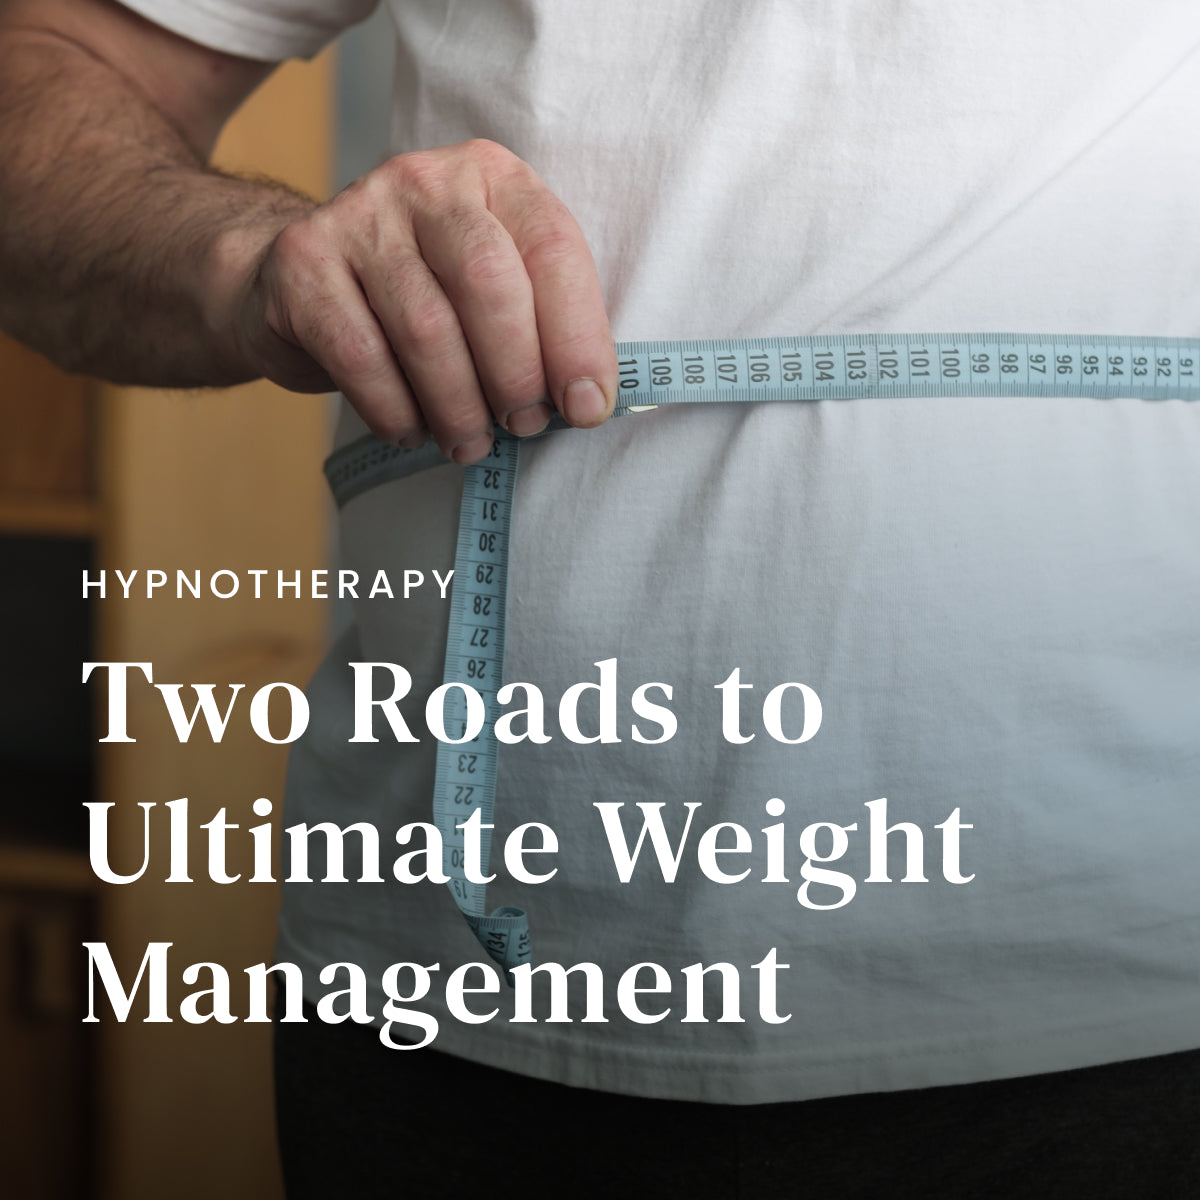 Two Roads to Ultimate Weight Management